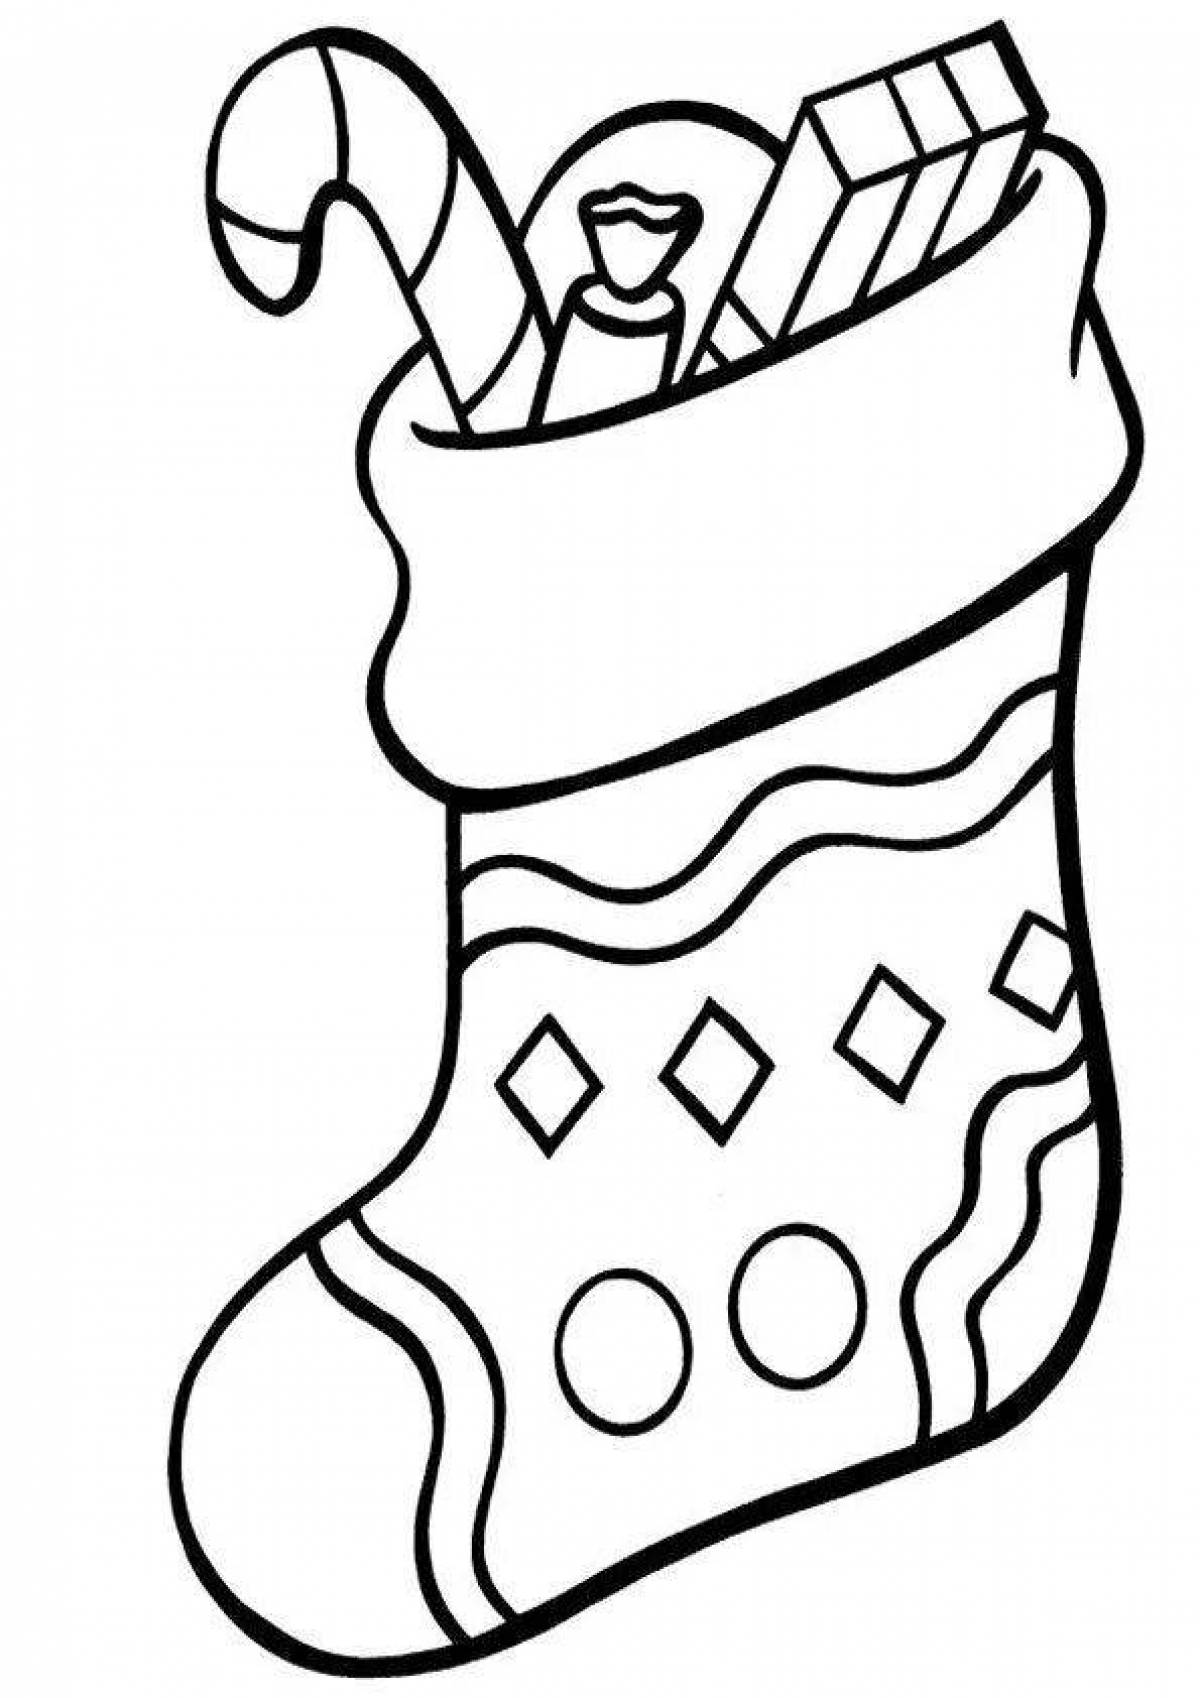 Coloring page cute felt boots